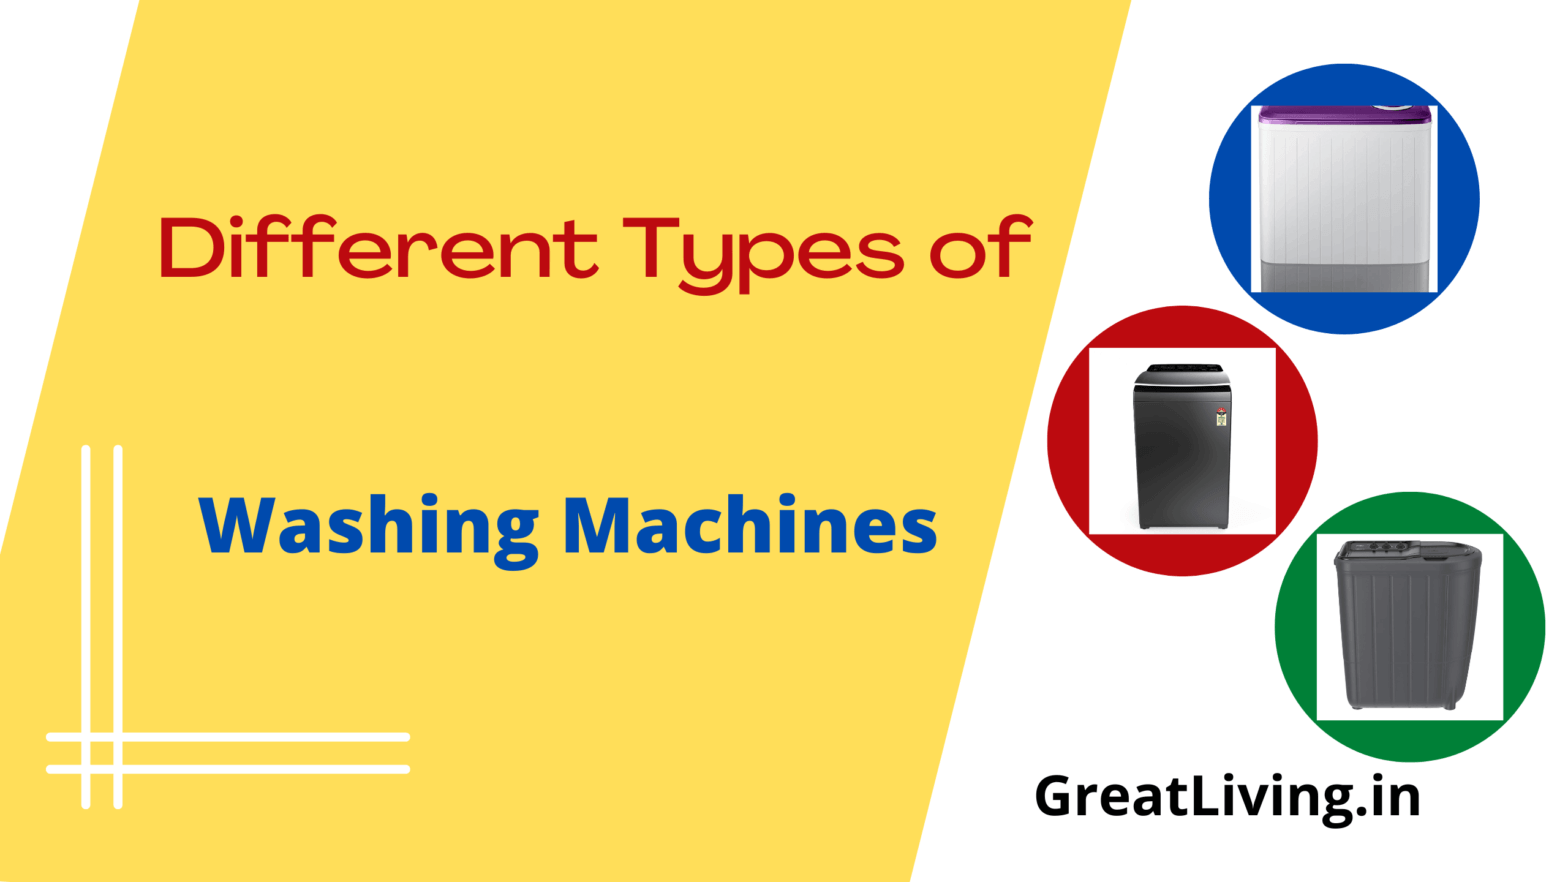 What are the Different Types of Washing Machines?